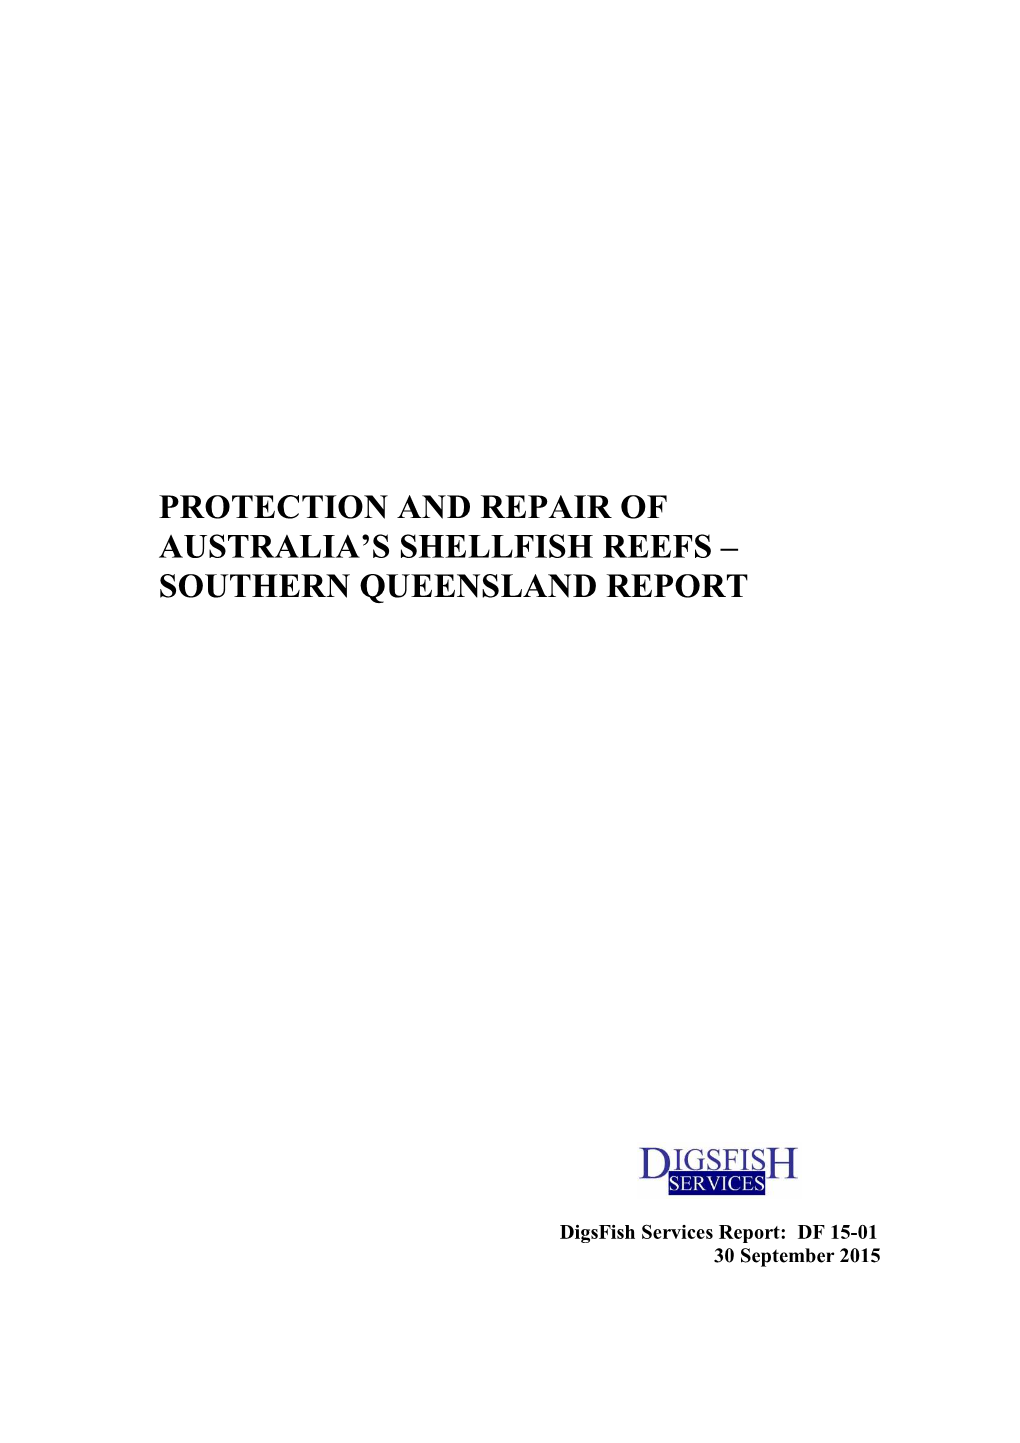 NESP Project Southern Queensland Report Digsfish